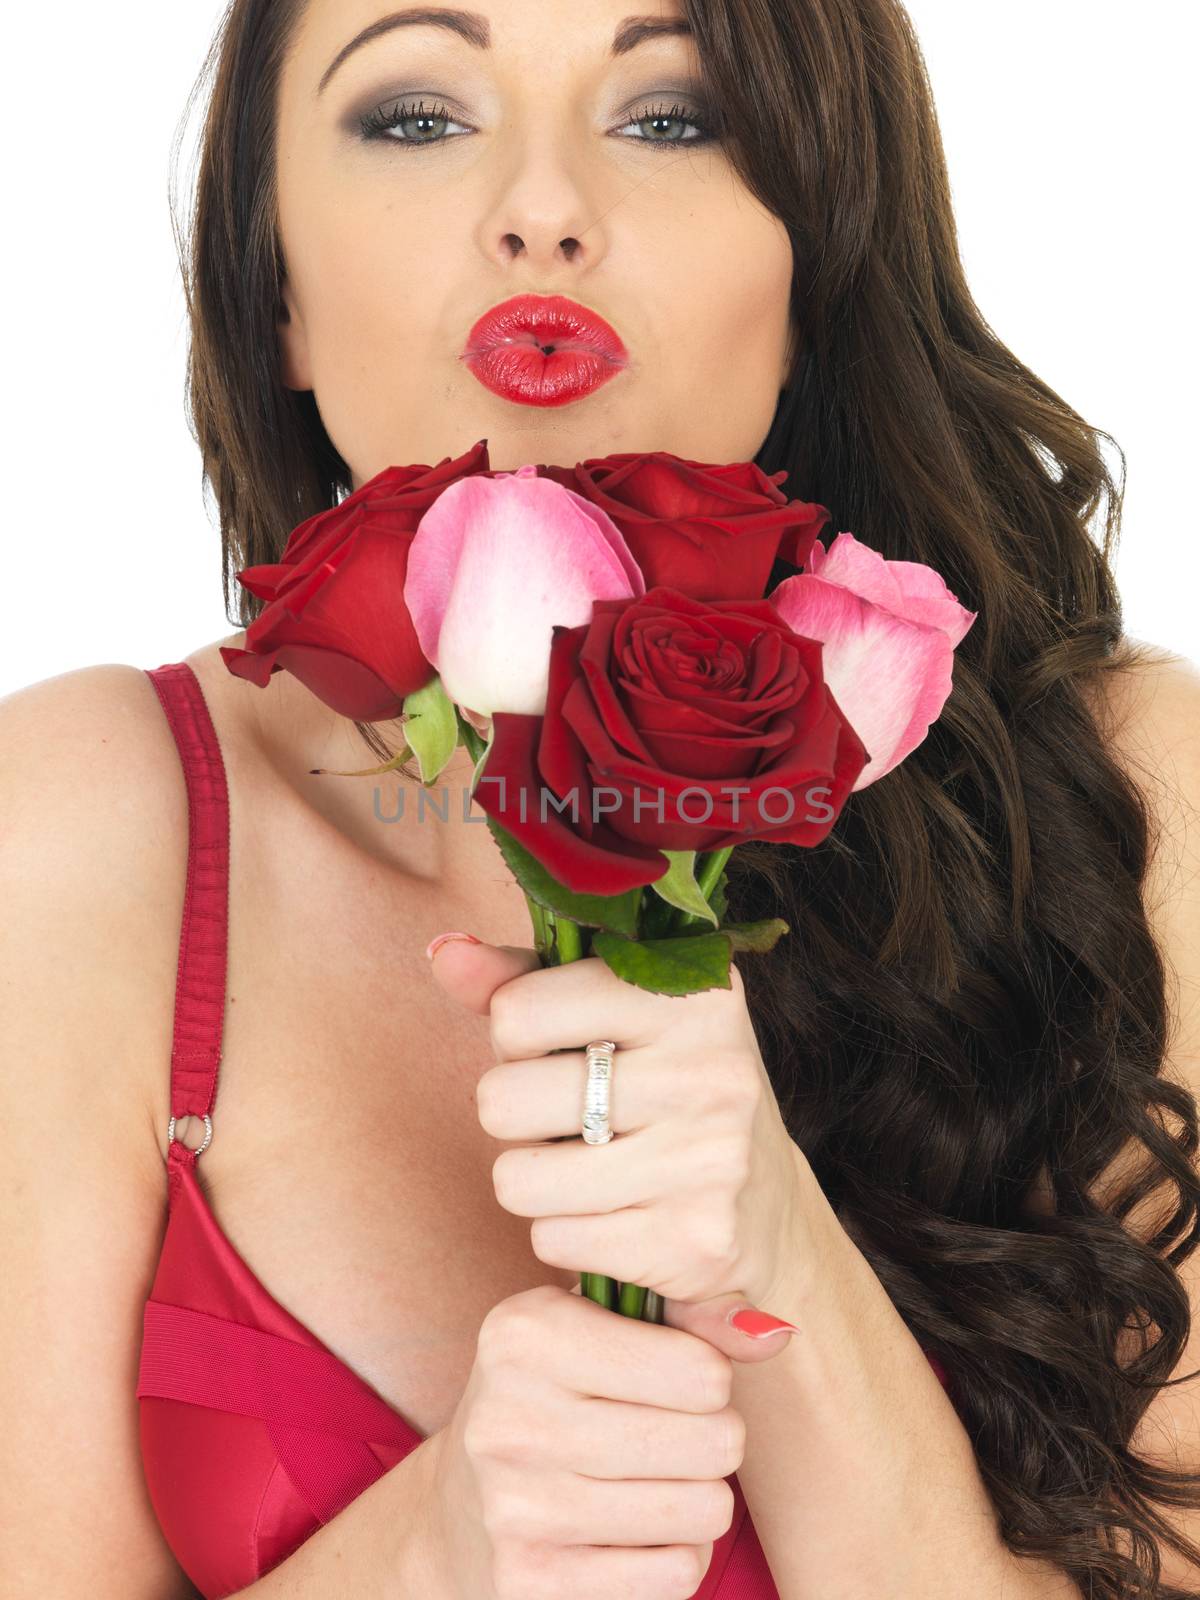 Sexy Young Woman Wearing Red Lingerie and Holding Red Roses by Whiteboxmedia